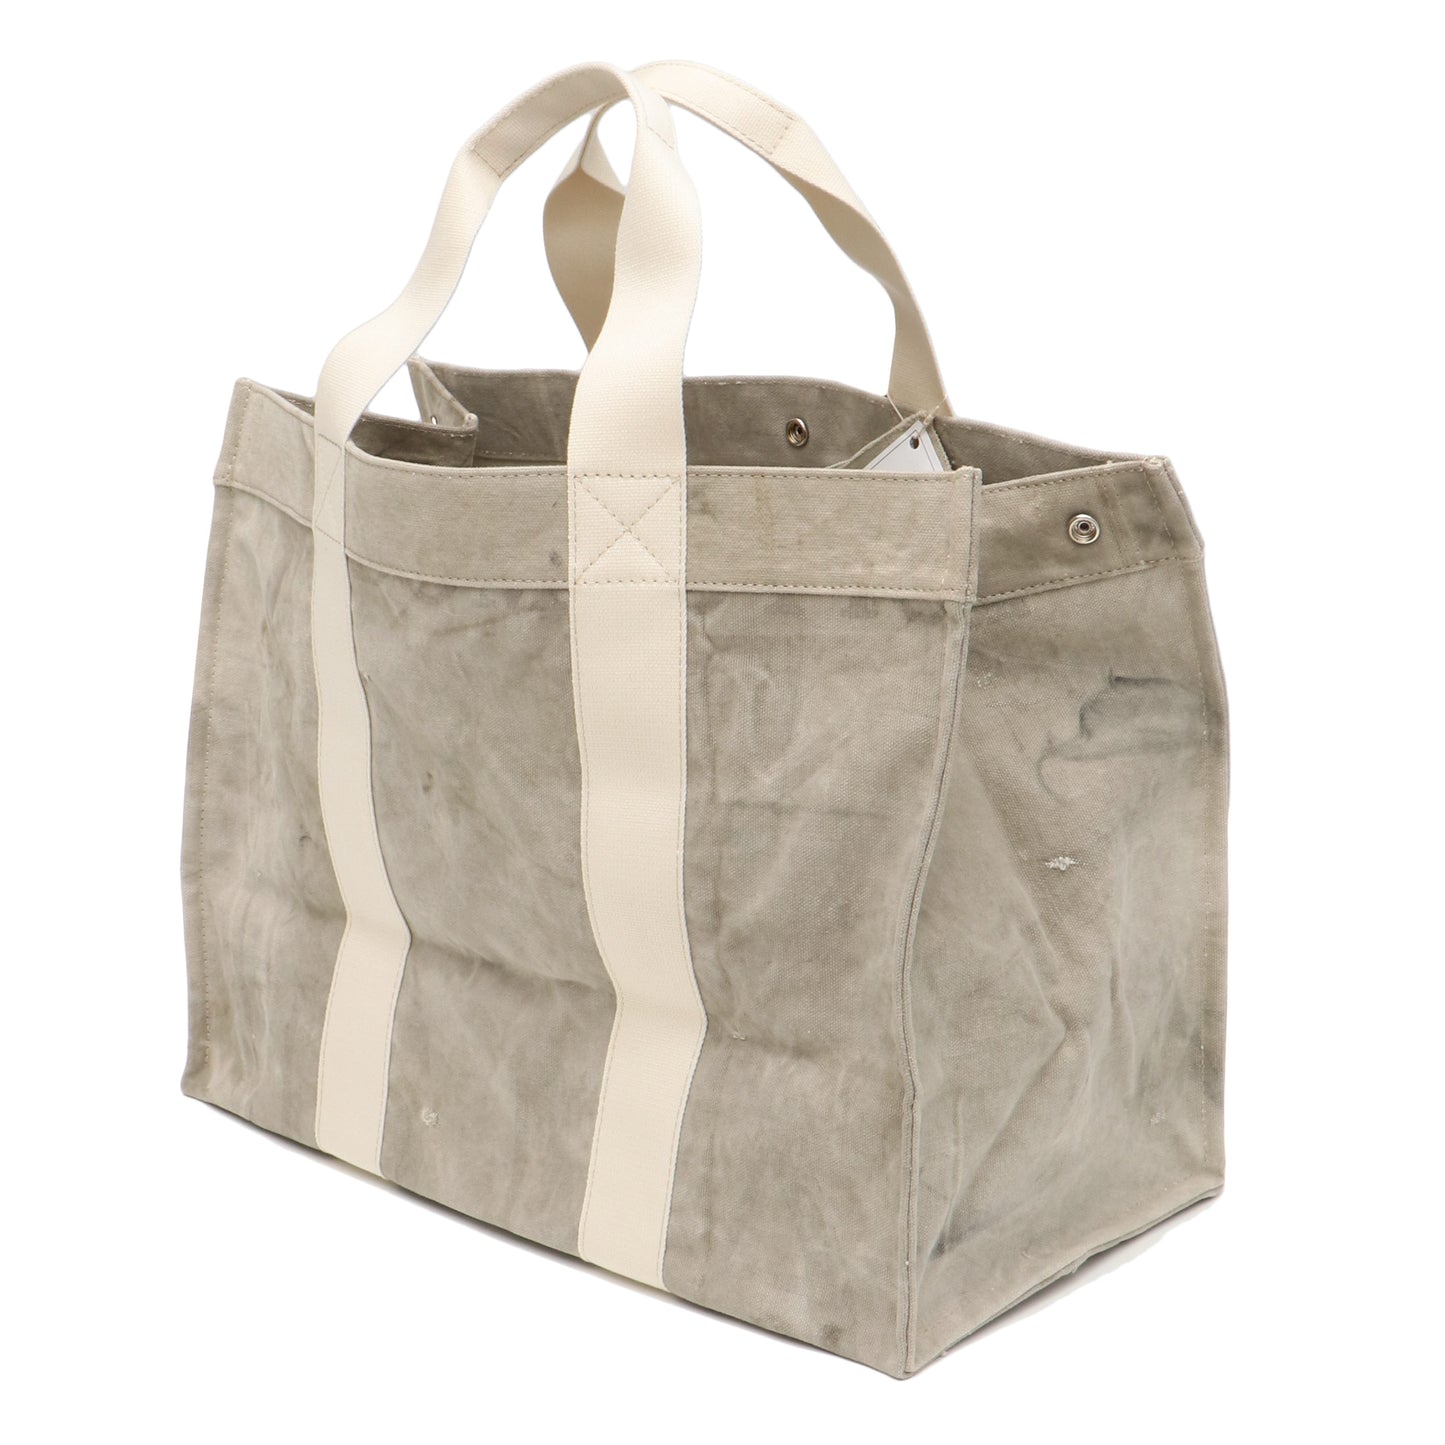 EASY TOTE LARGE WHITE